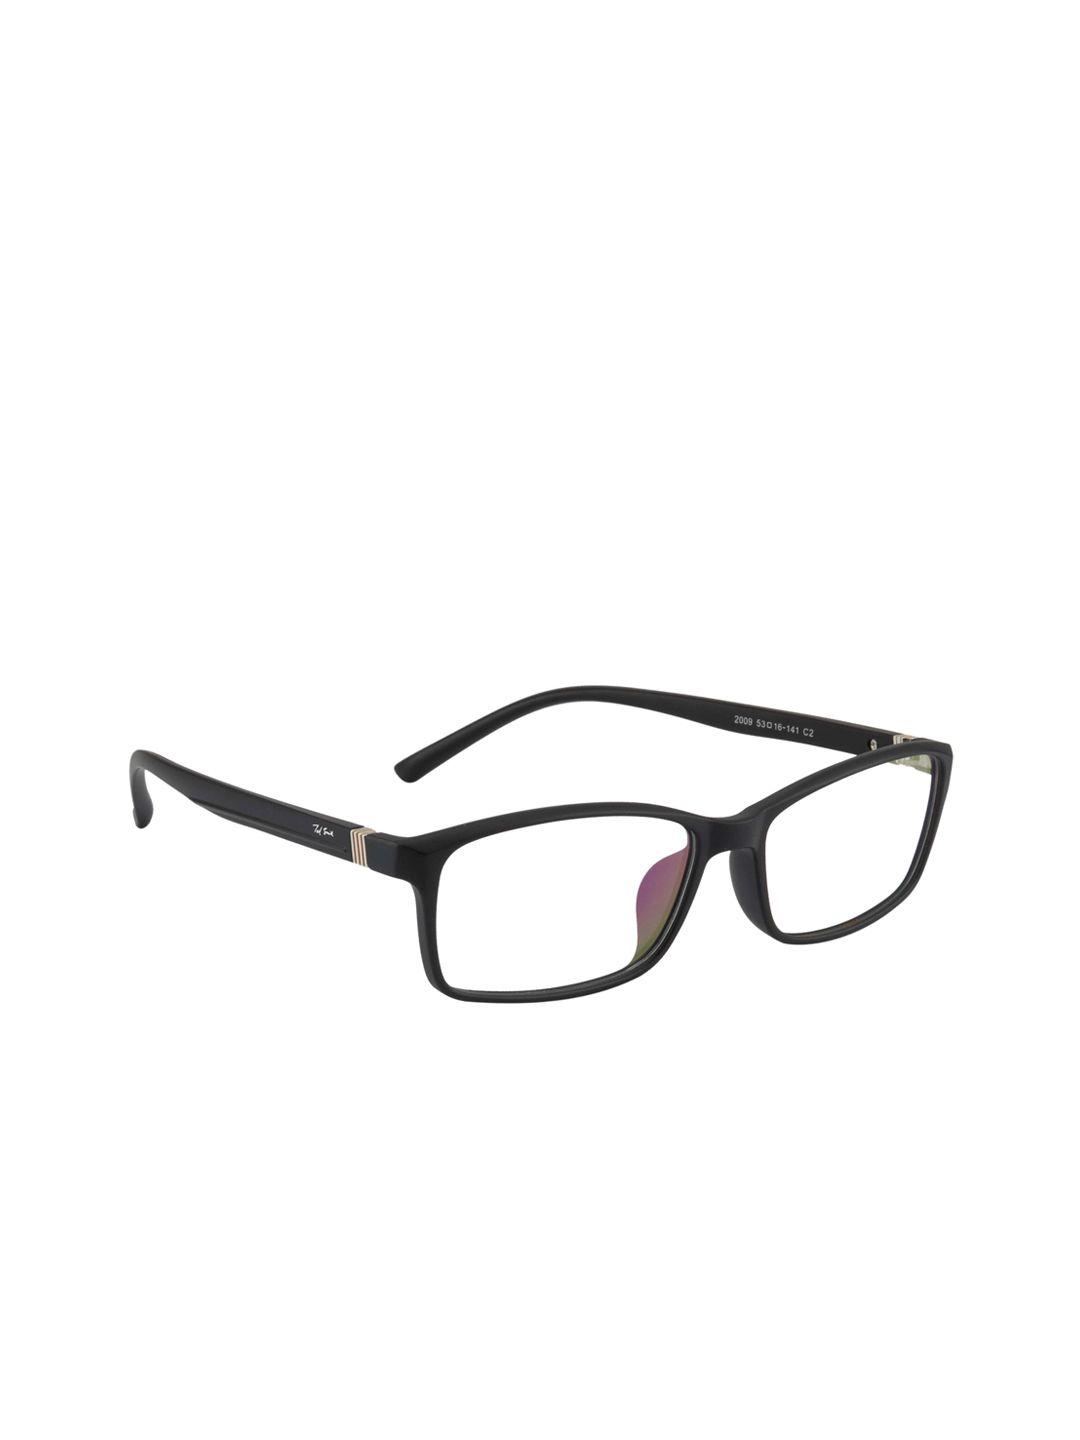 ted smith unisex black solid full rim rectangle frames ts-nc-2009_c2